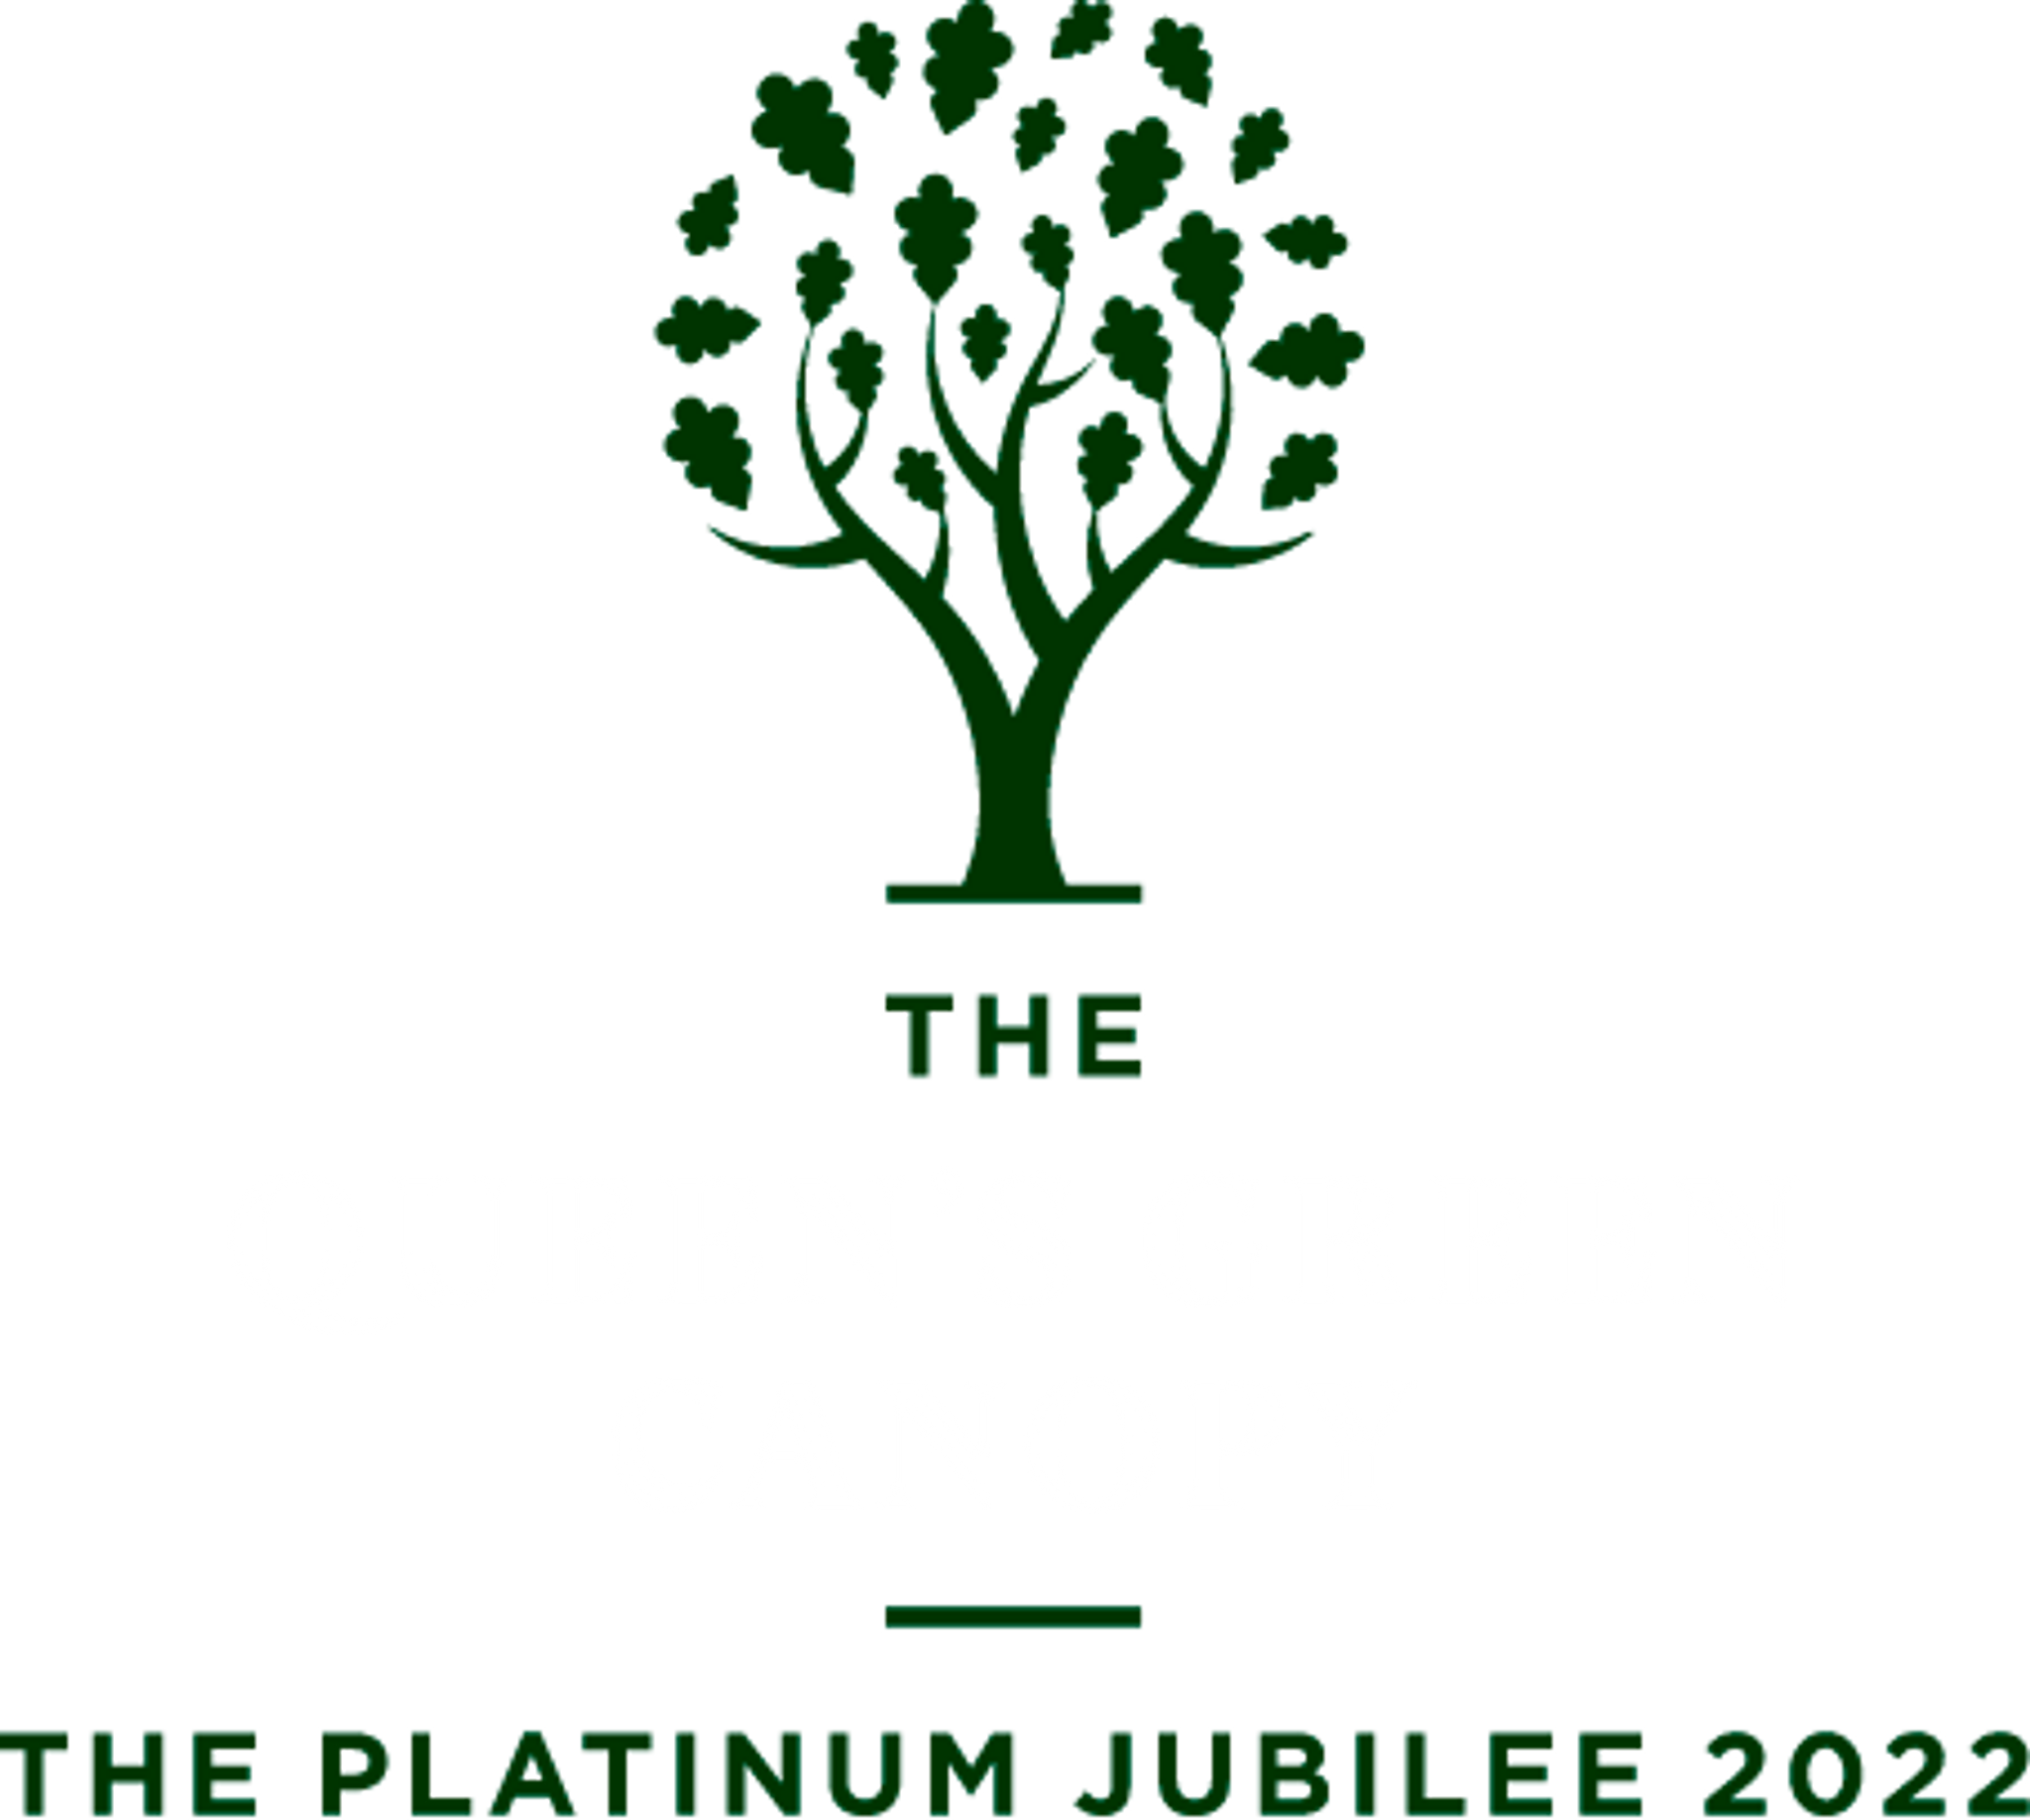 The Queen's Green Canopy